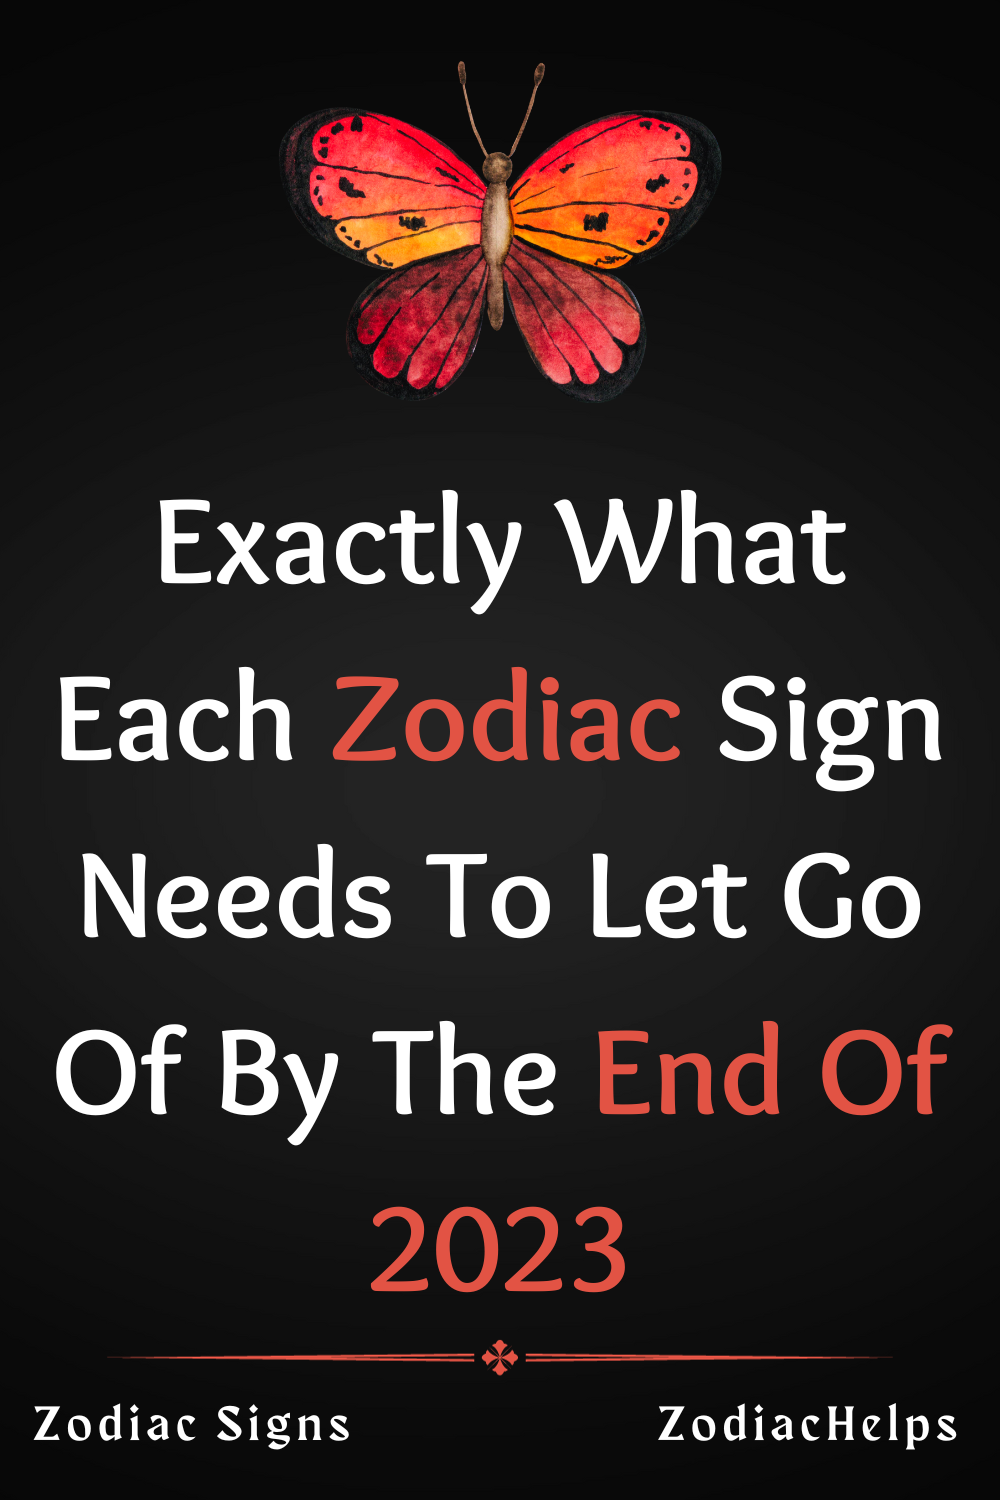 Exactly What Each Zodiac Sign Needs To Let Go Of By The End Of 2023